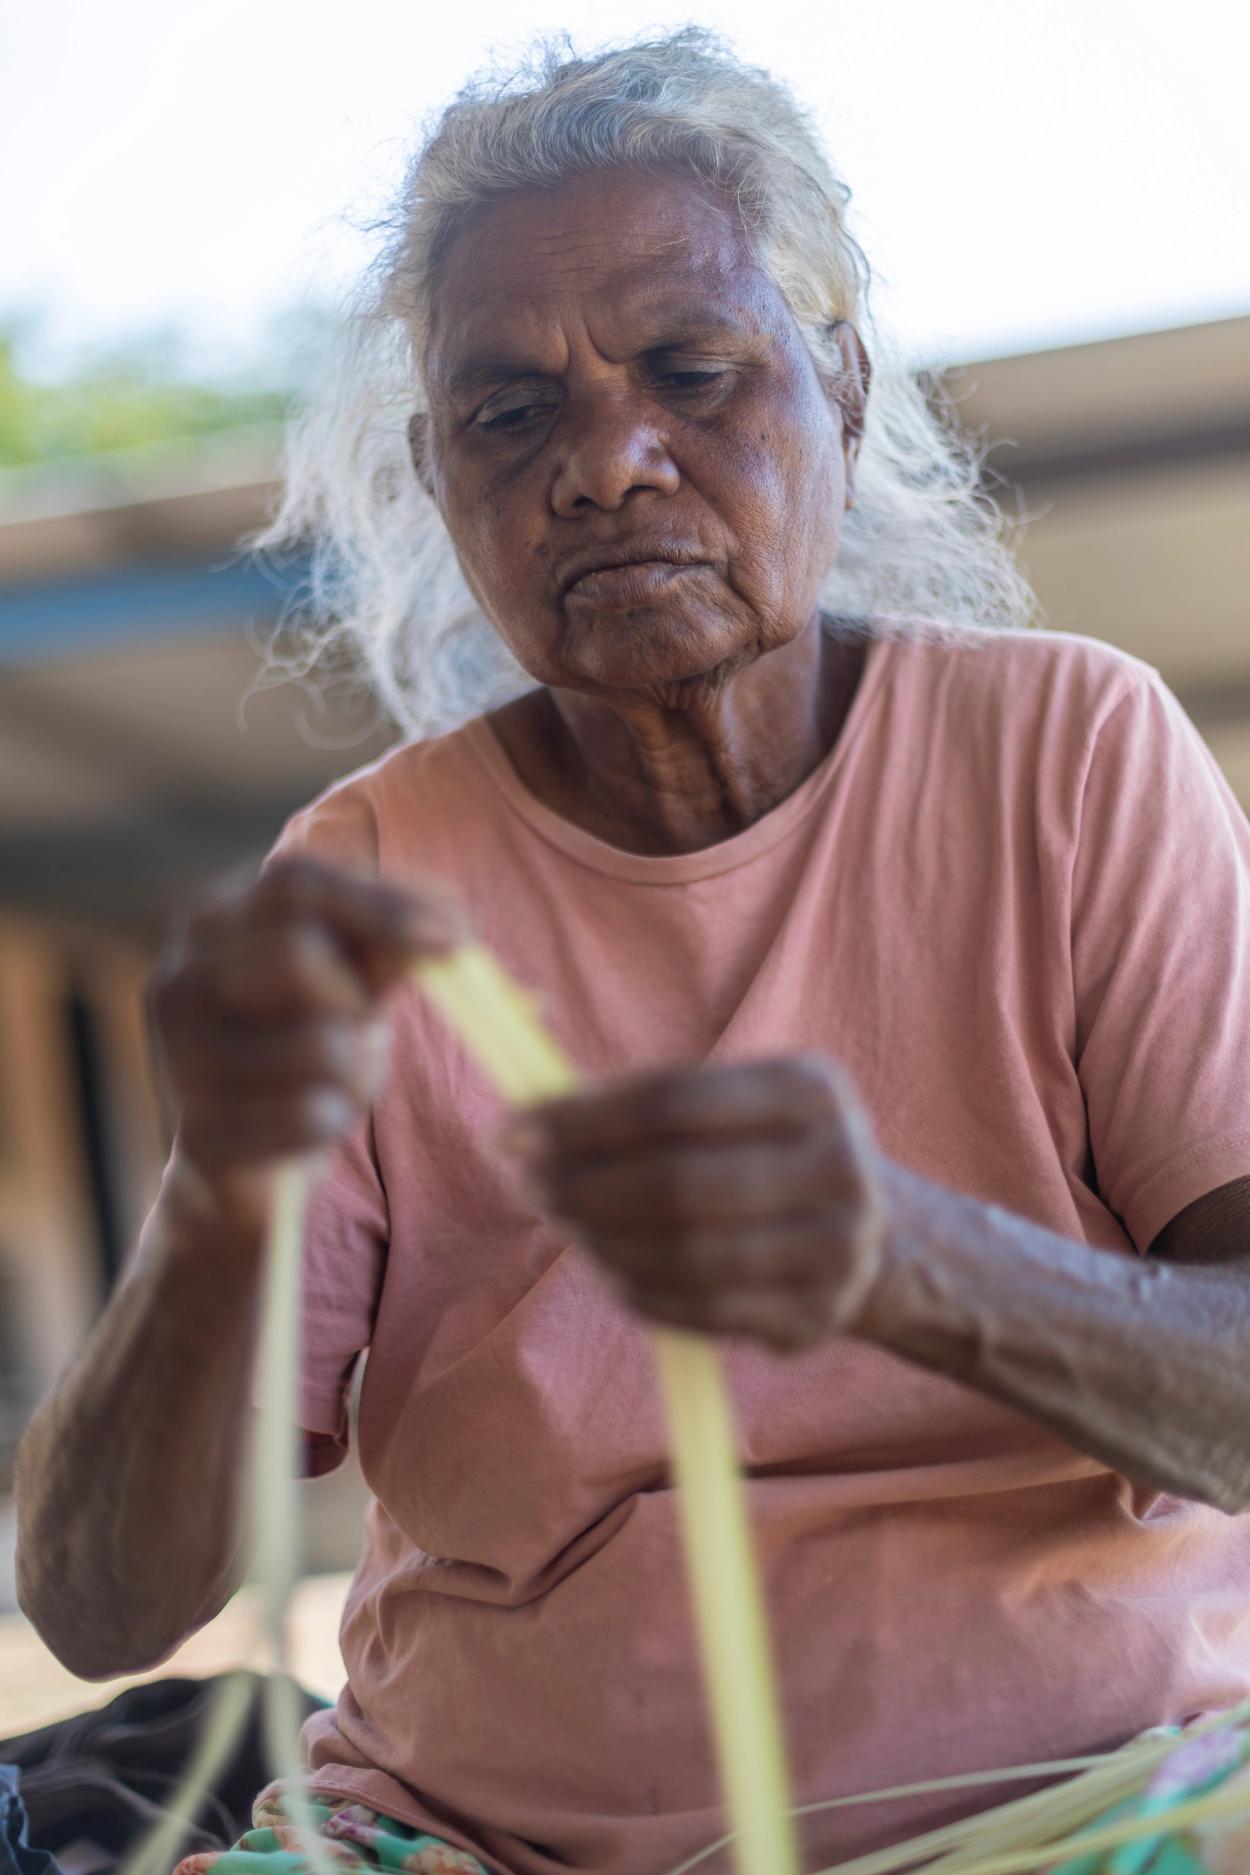 A woman sitting and holding a piece of pandanus in her hands.